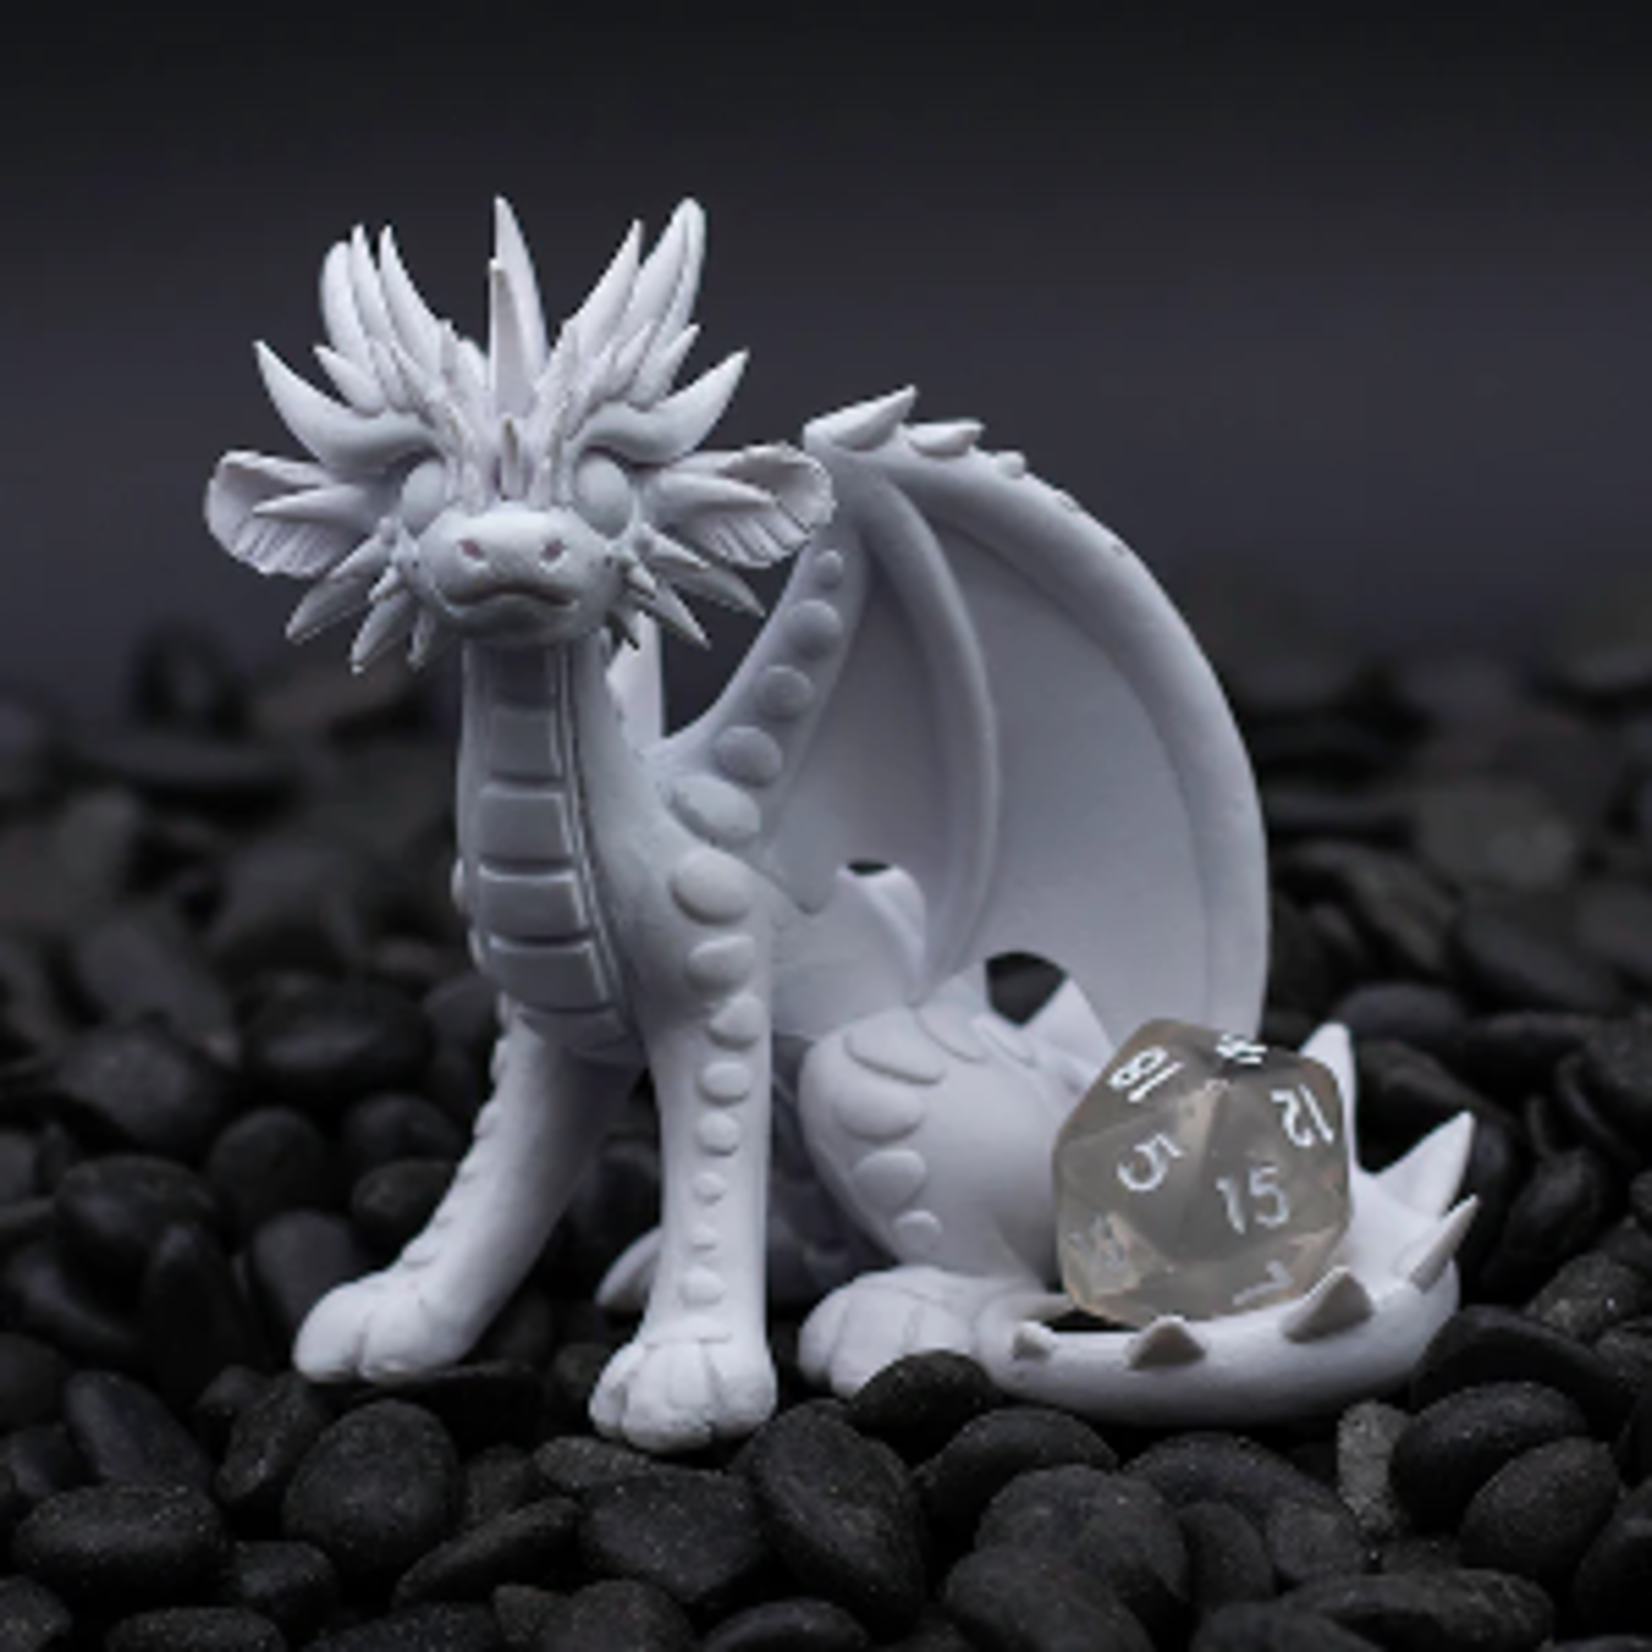 Dragons & Beasties Dragons and Beasties: Paint Your Own Figure - Pigment Dice Dragon